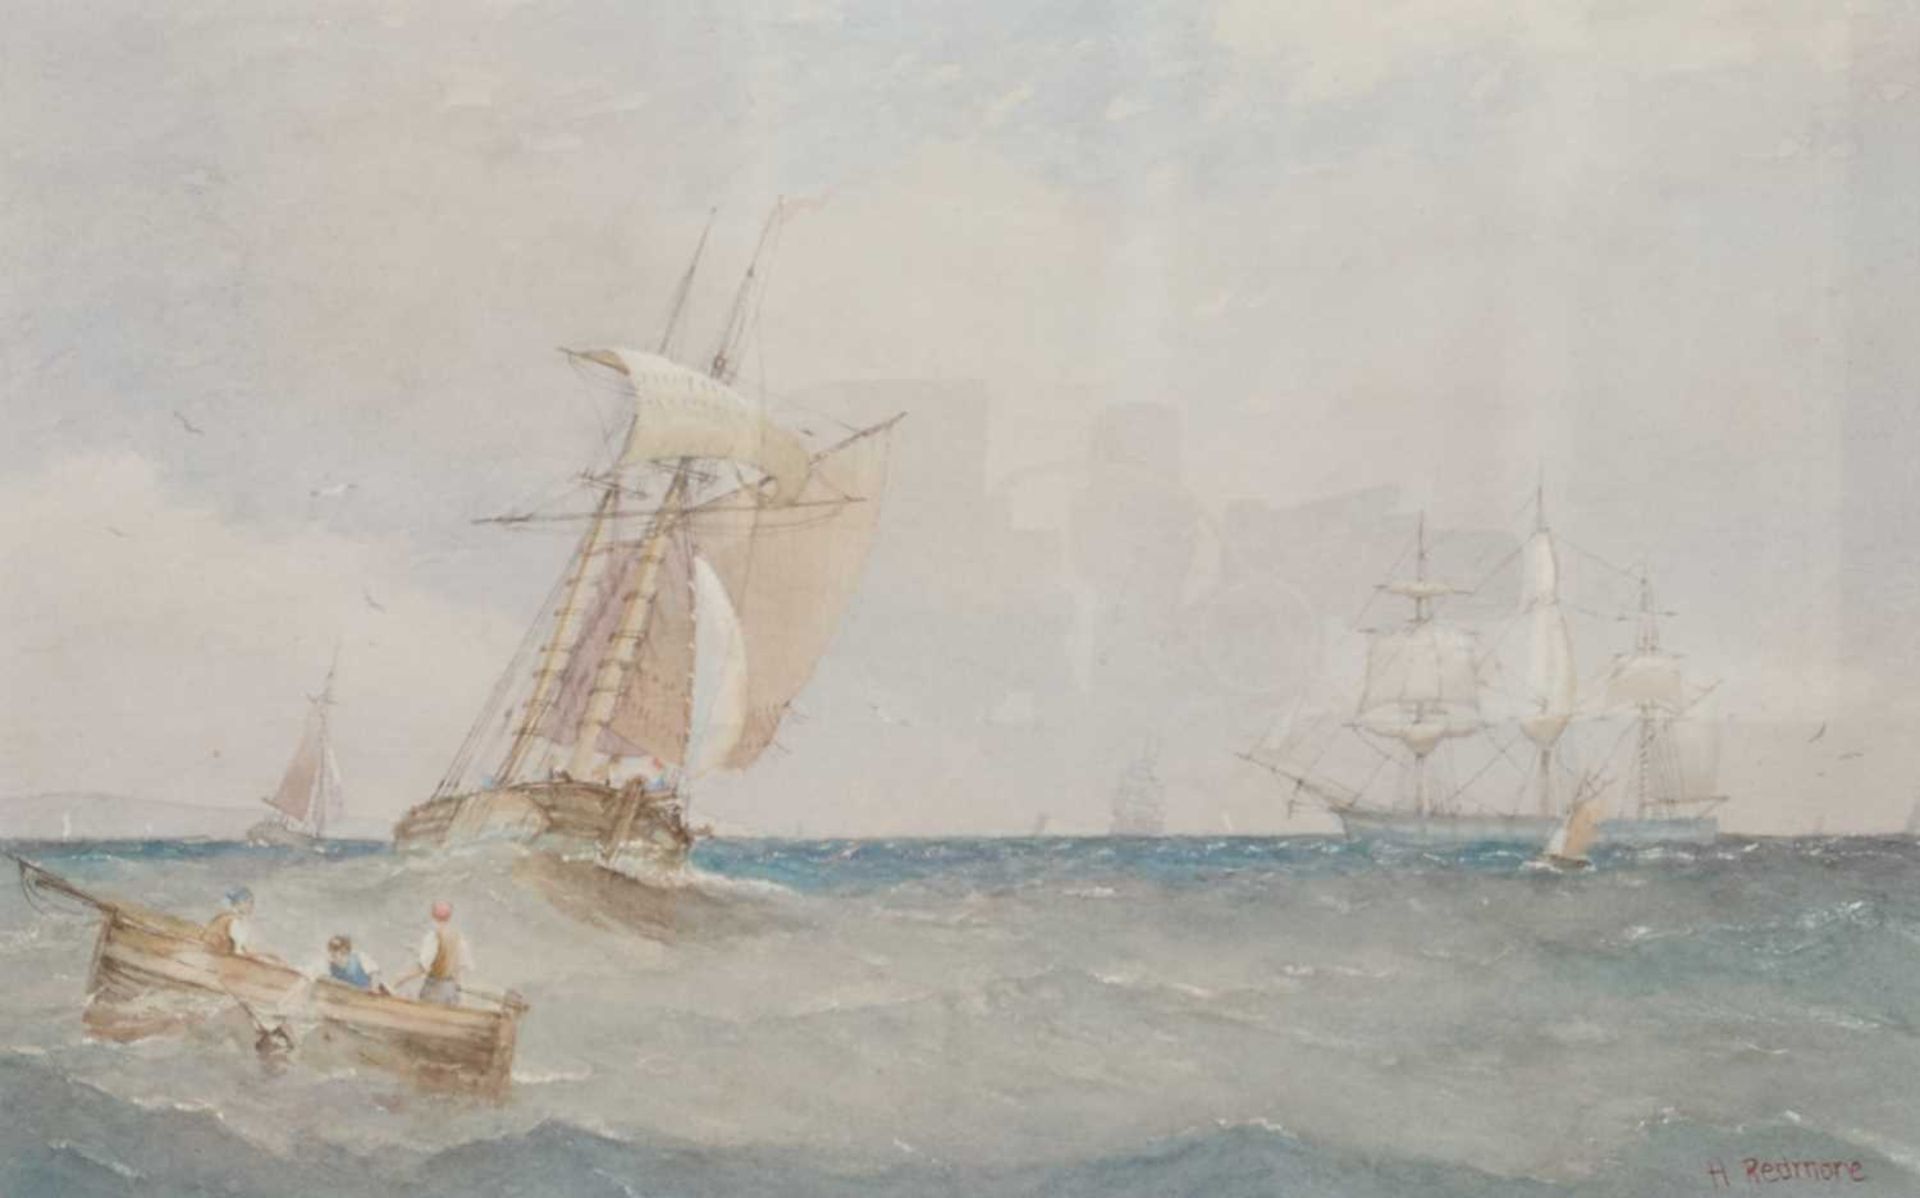 HENRY REDMORE (1820-1887) SHIPS OFF THE COAST